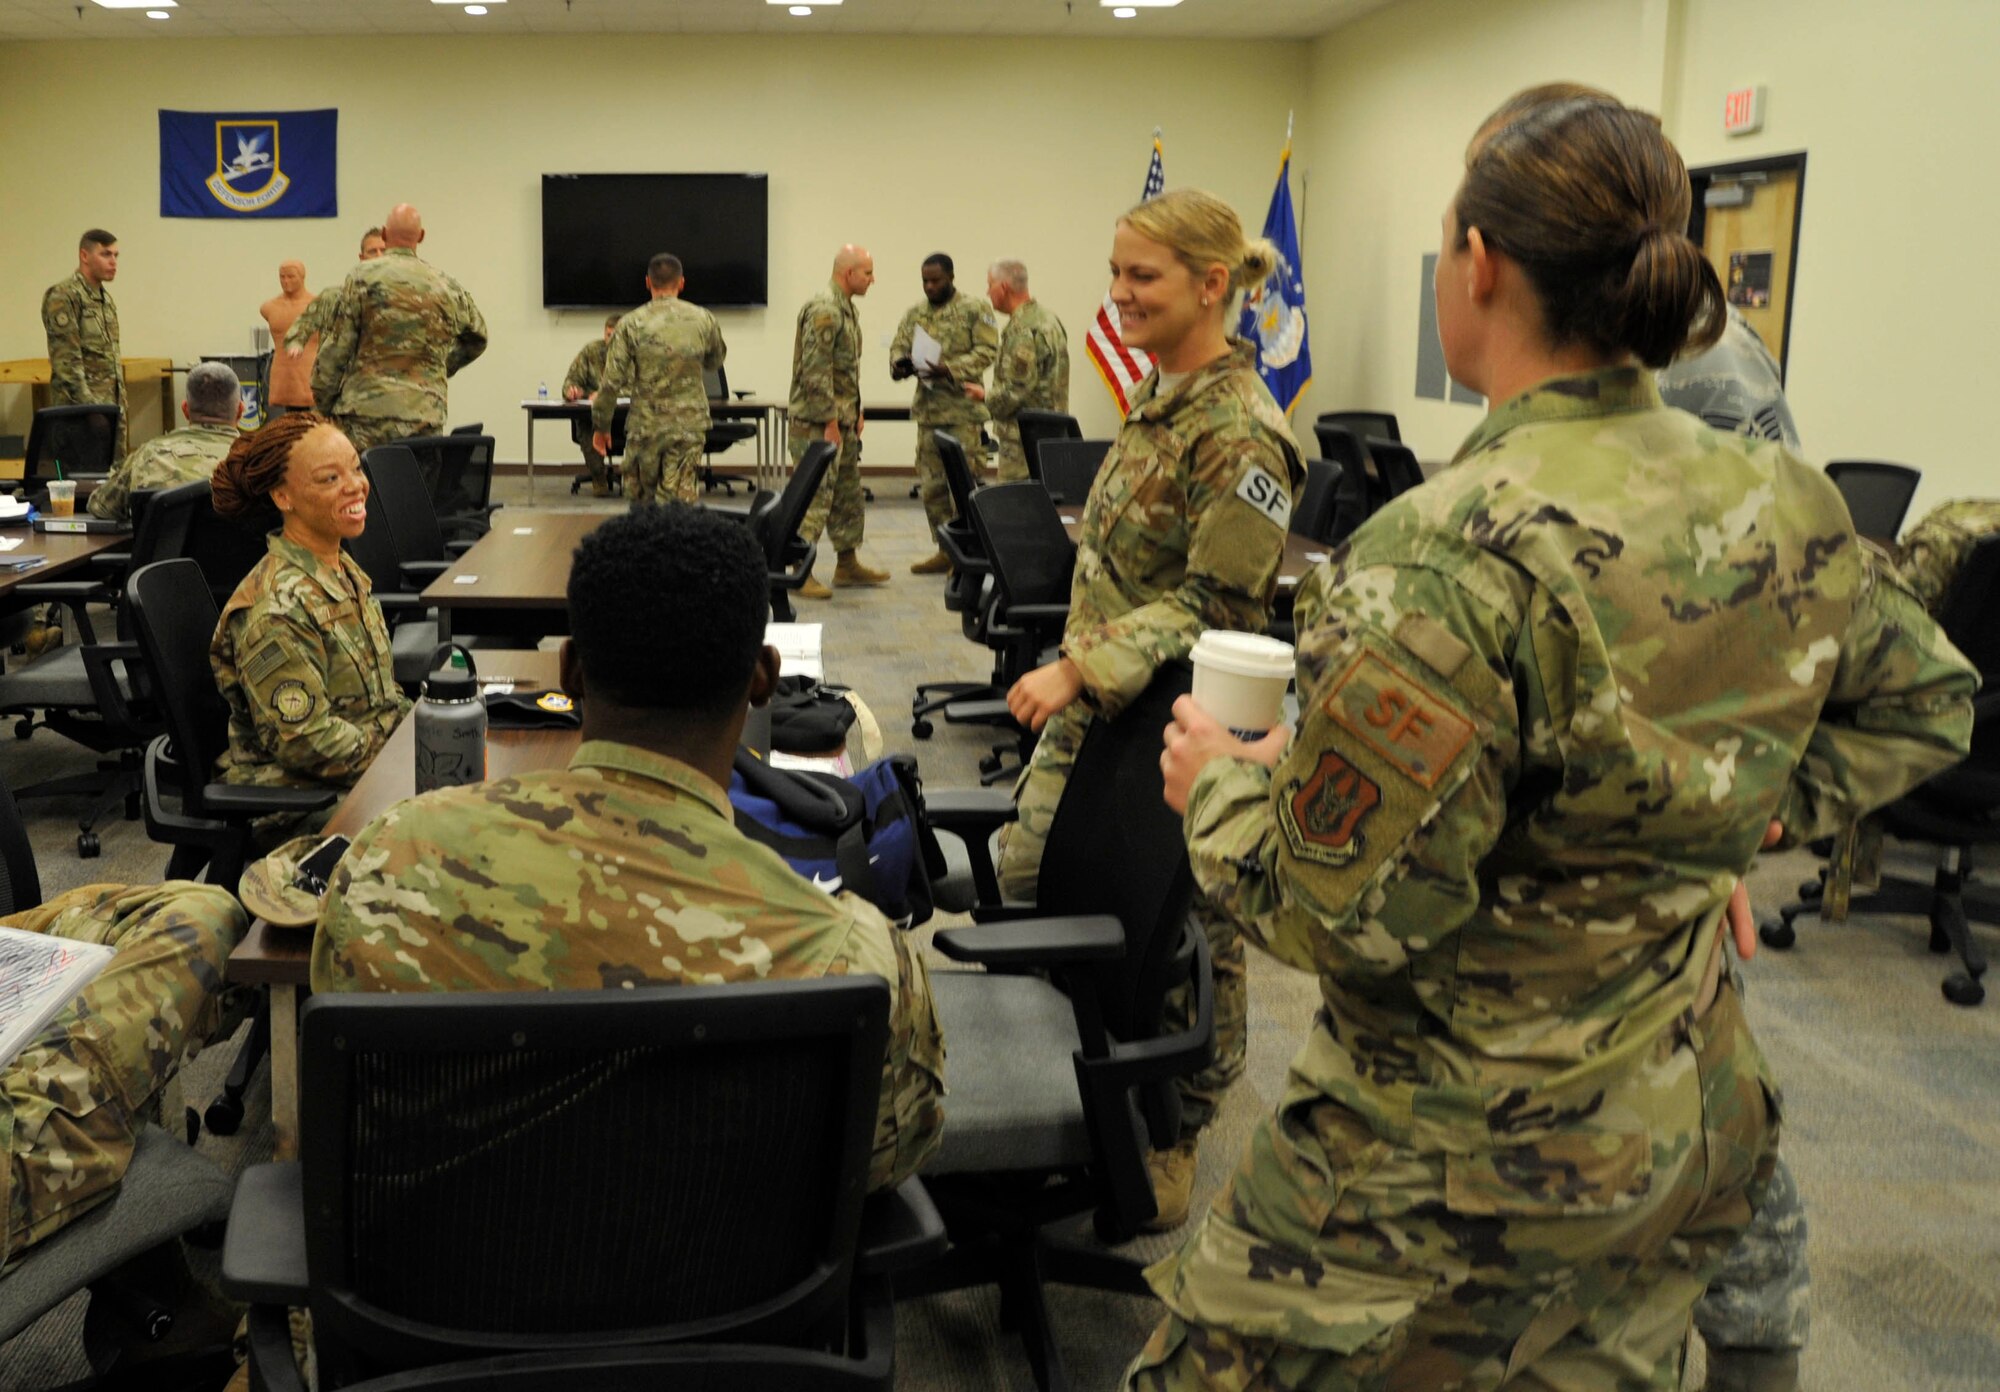 Senior Airman Tiffany Evans (left, seated) 403rd Security Forces Squadron member smiles while listening to other Airmen inside the 403rd Security Forces Squadron building, May 8, 2019, Keesler Air Force Base, Mississippi.  Over 30 members of the 403rd Security Forces Squadron returned from a 180-day deployment to the United Arab Emirates where they provided security to the Al Dhafra Air Base from October 2018 to May 2019. (U.S. Air Force photo by Tech. Sgt. Michael Farrar)